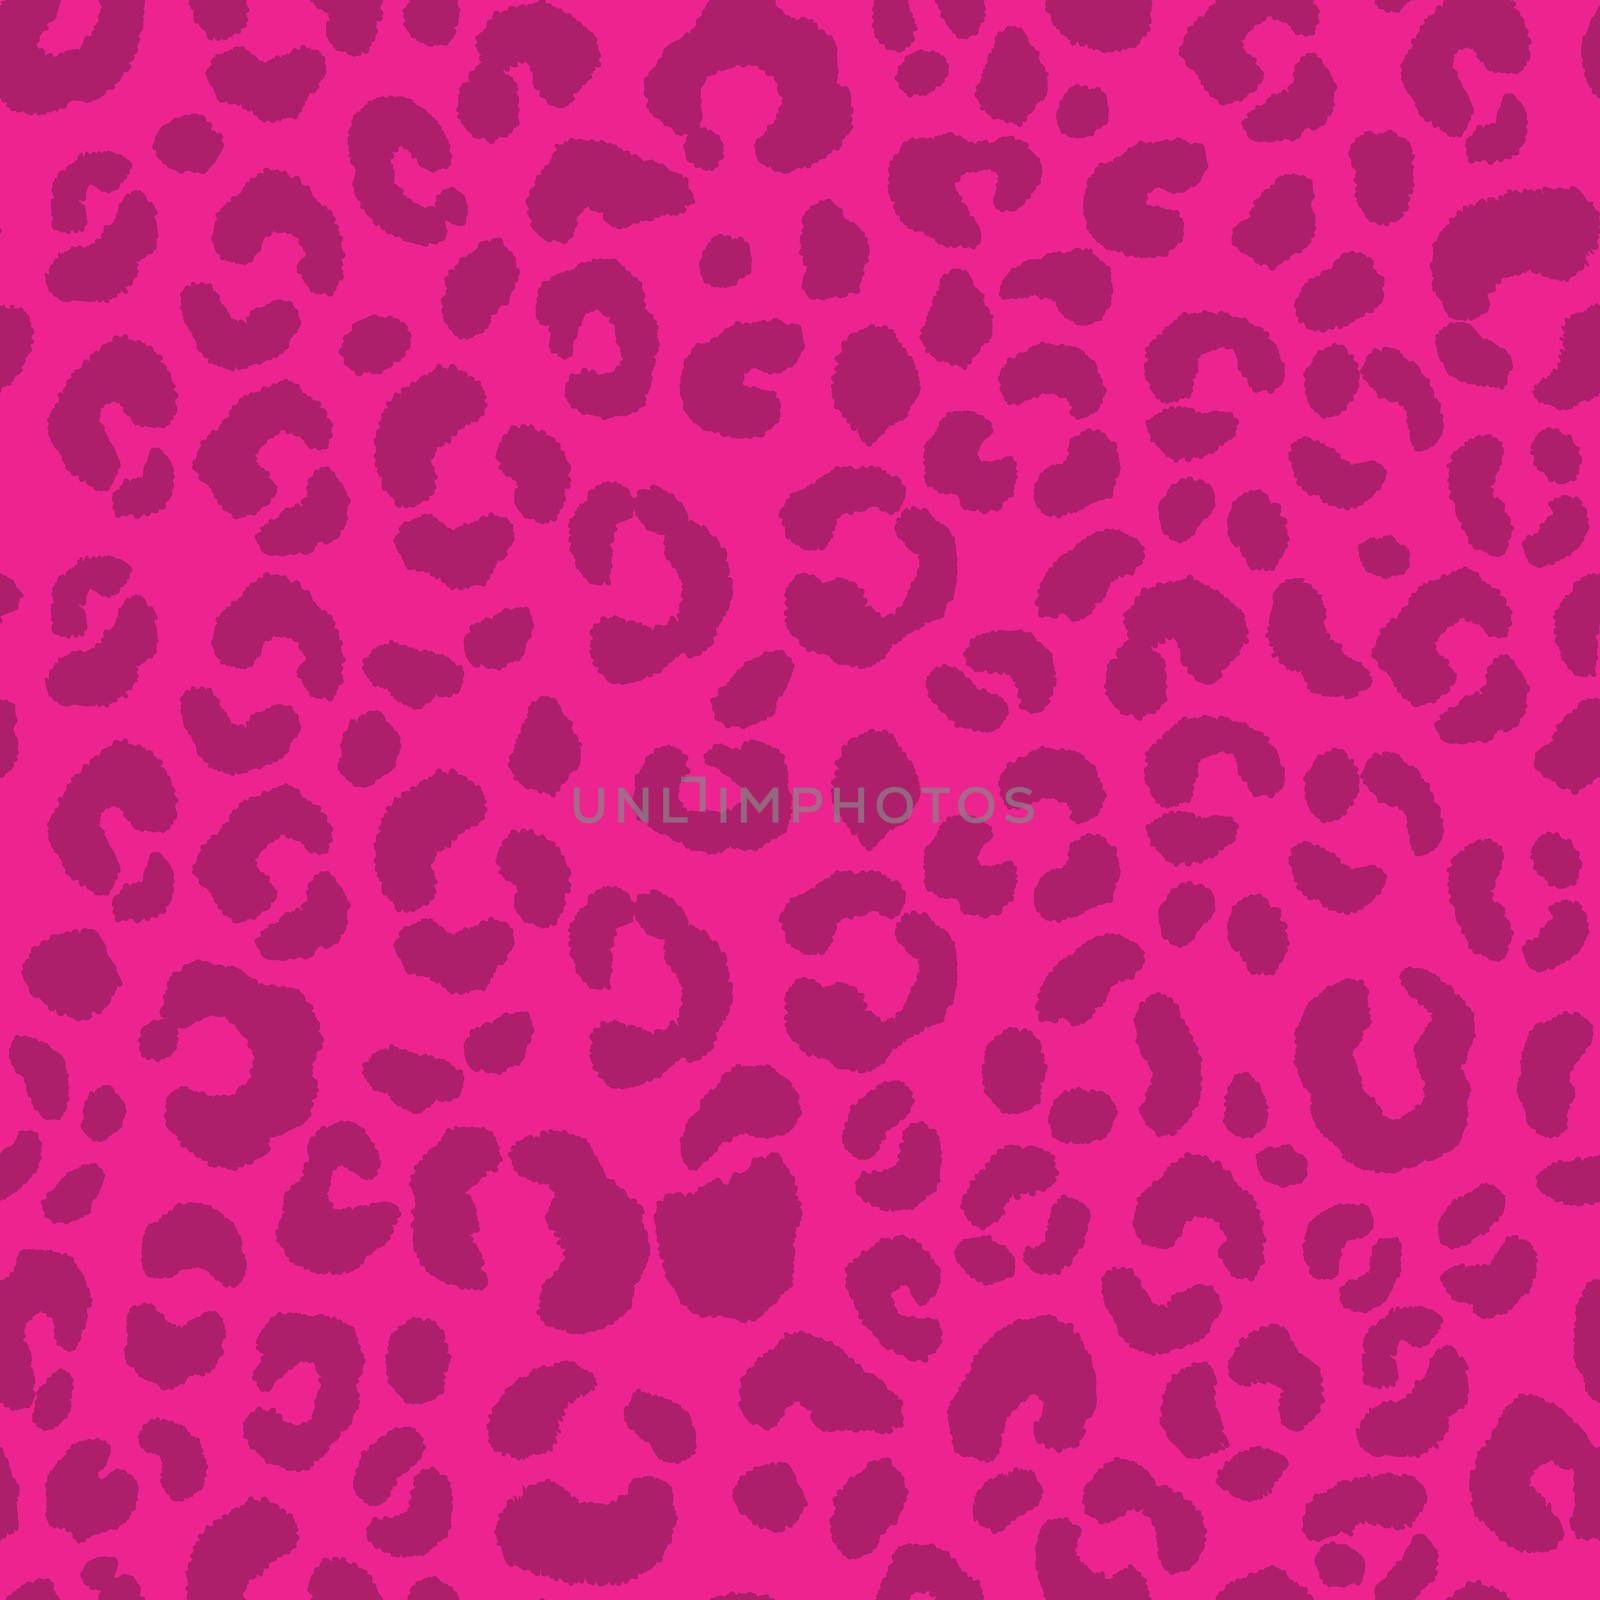 Abstract modern leopard seamless pattern. Animals trendy background. Pink decorative vector illustration for print, card, postcard, fabric, textile. Modern ornament of stylized skin by allaku